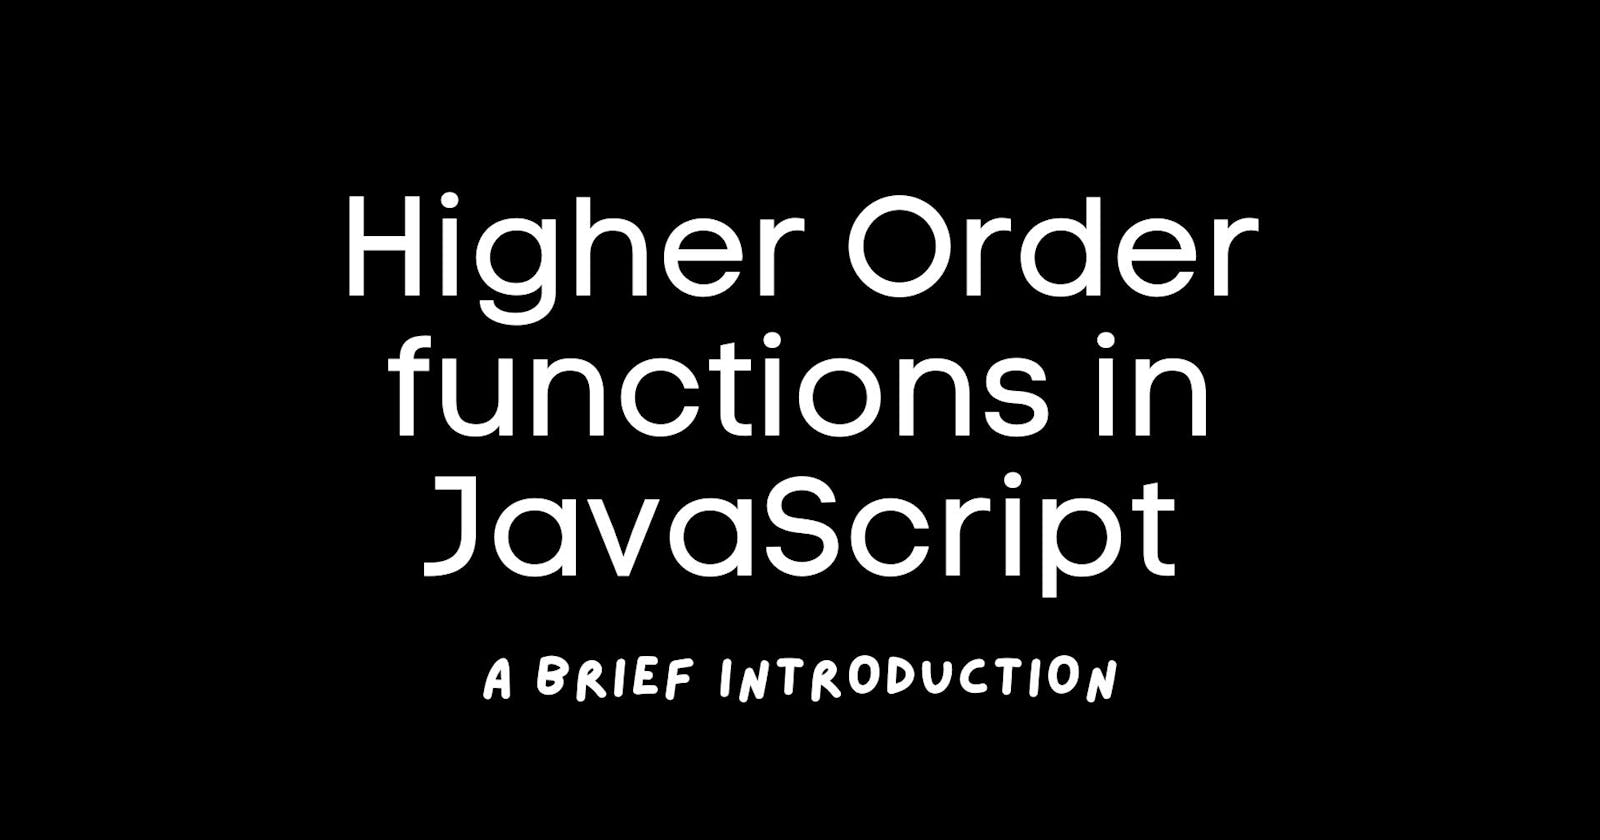 Higher Order functions in JavaScript -
A brief introduction